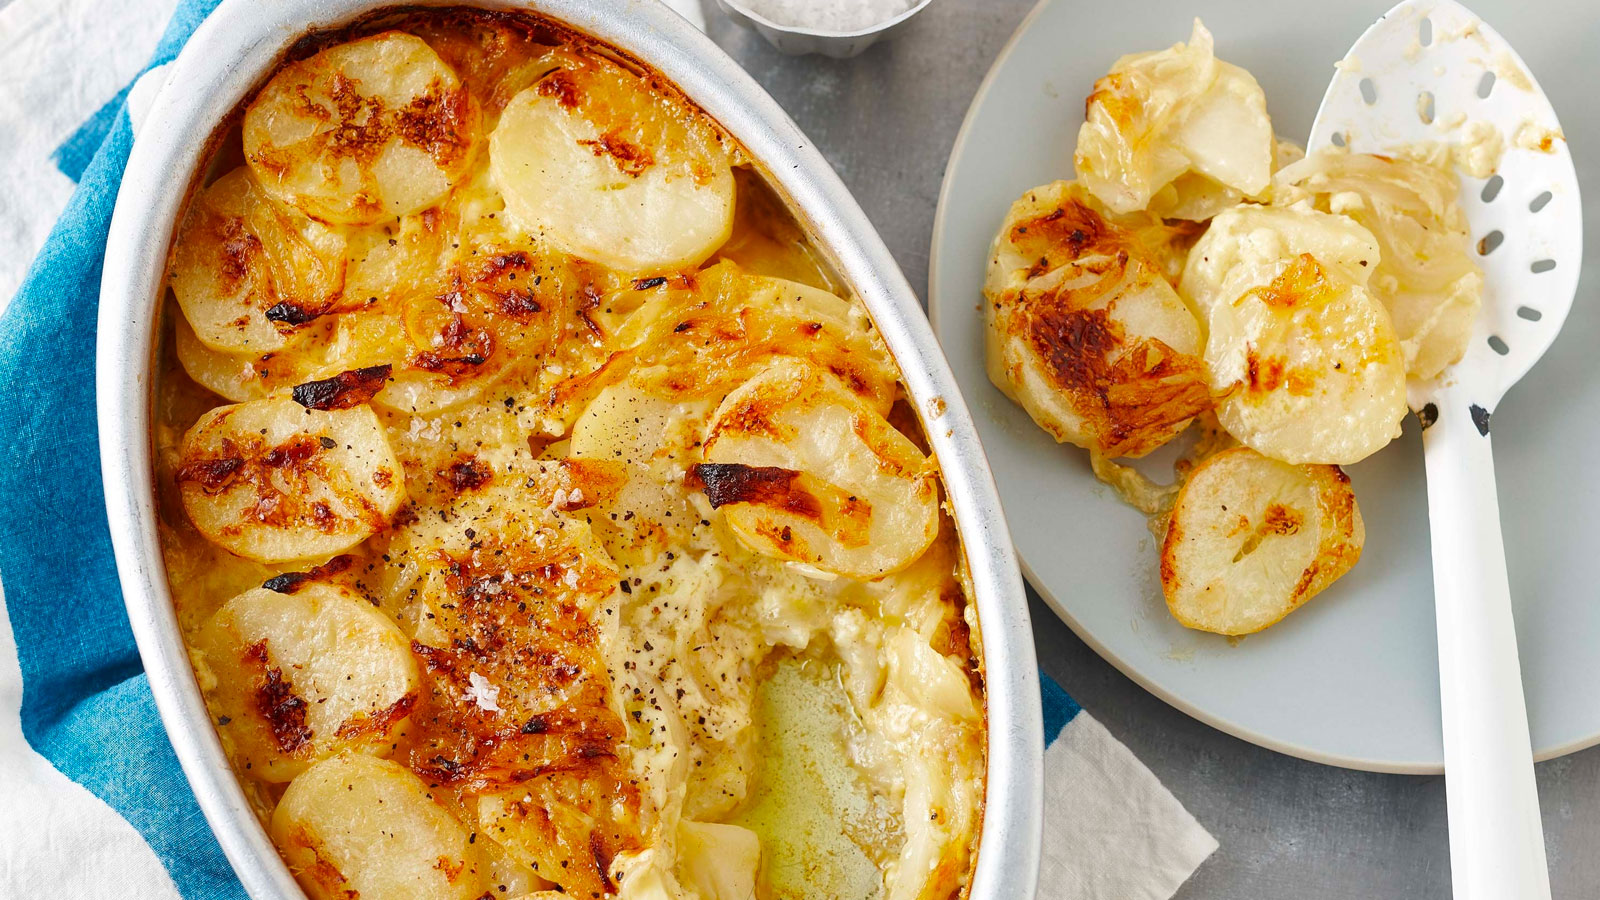 Eat at an Endless Buffet & We'll Guess Your Age & Gender Quiz 50 scalloped potatoes